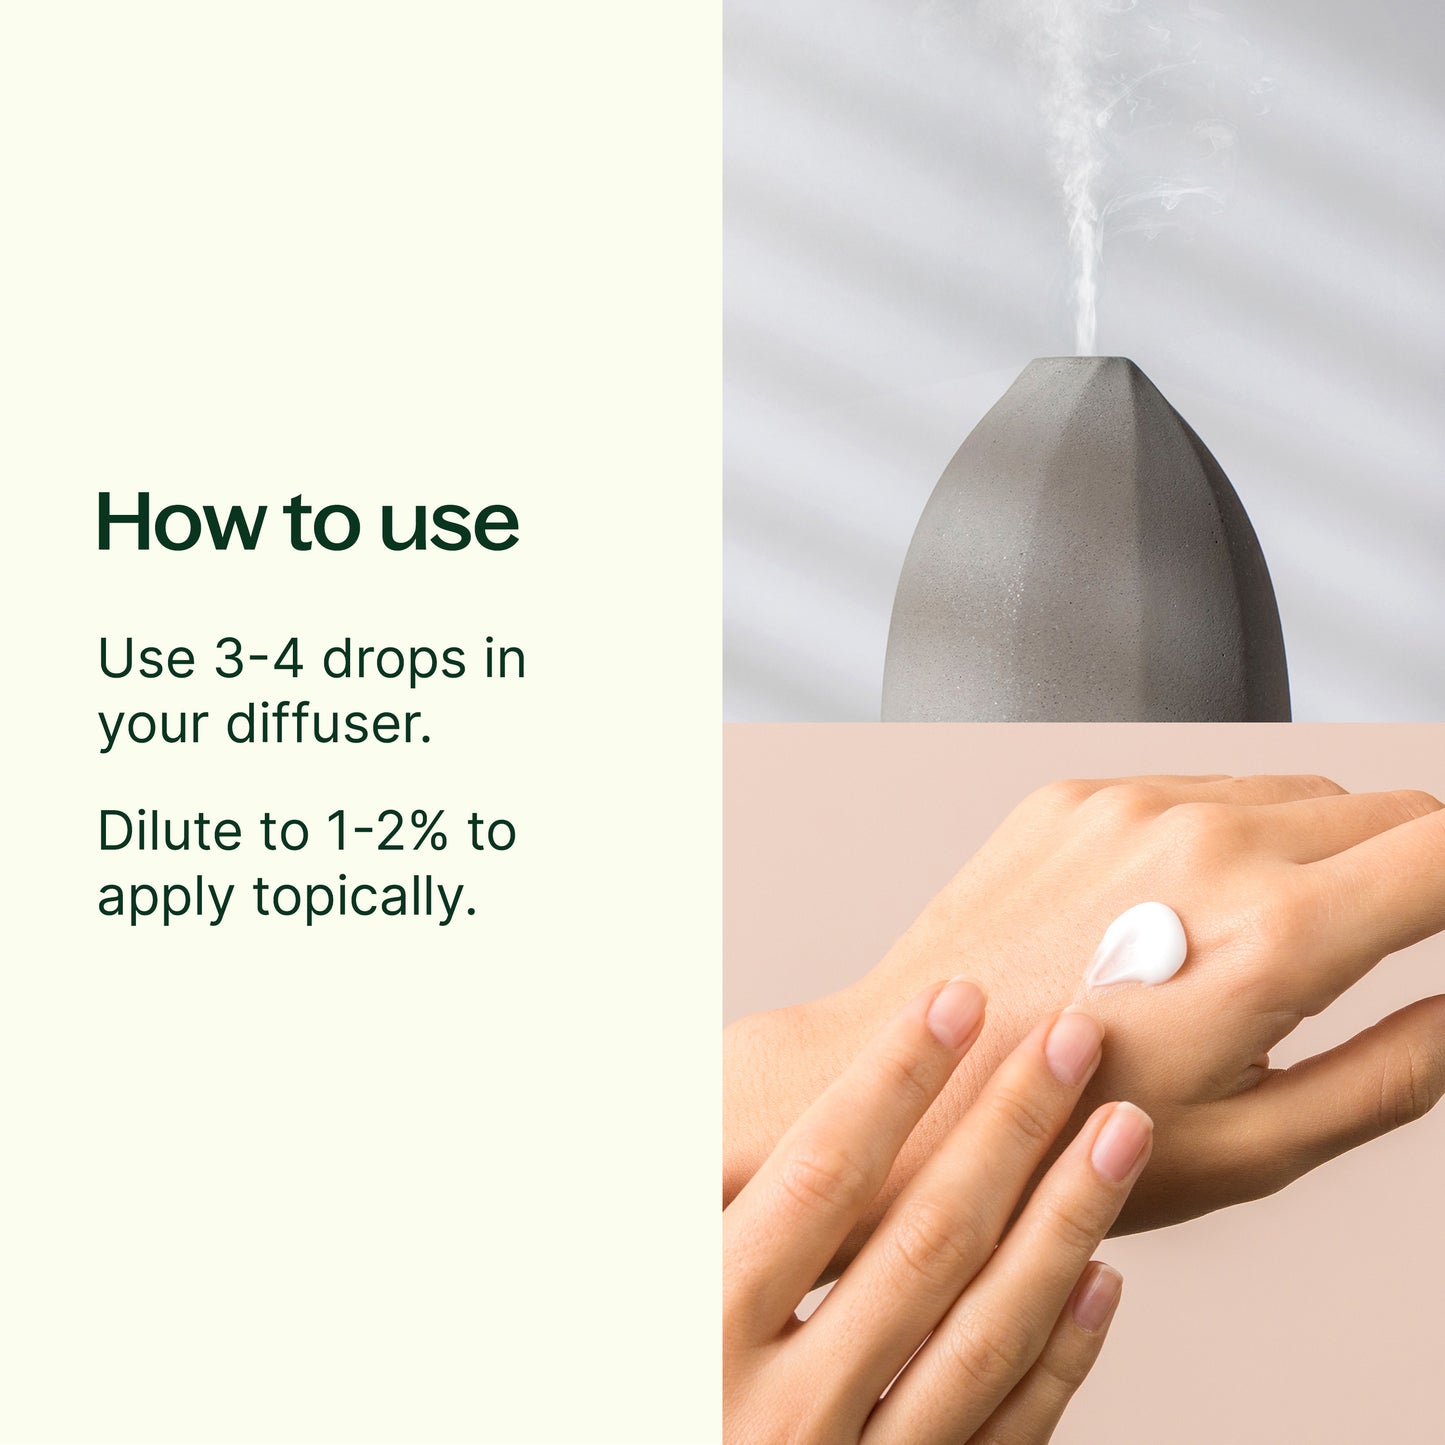 How to Use Lemon Essential Oil: Use 3-4 drops in your diffuser or dilute to 1-2% to apply topically